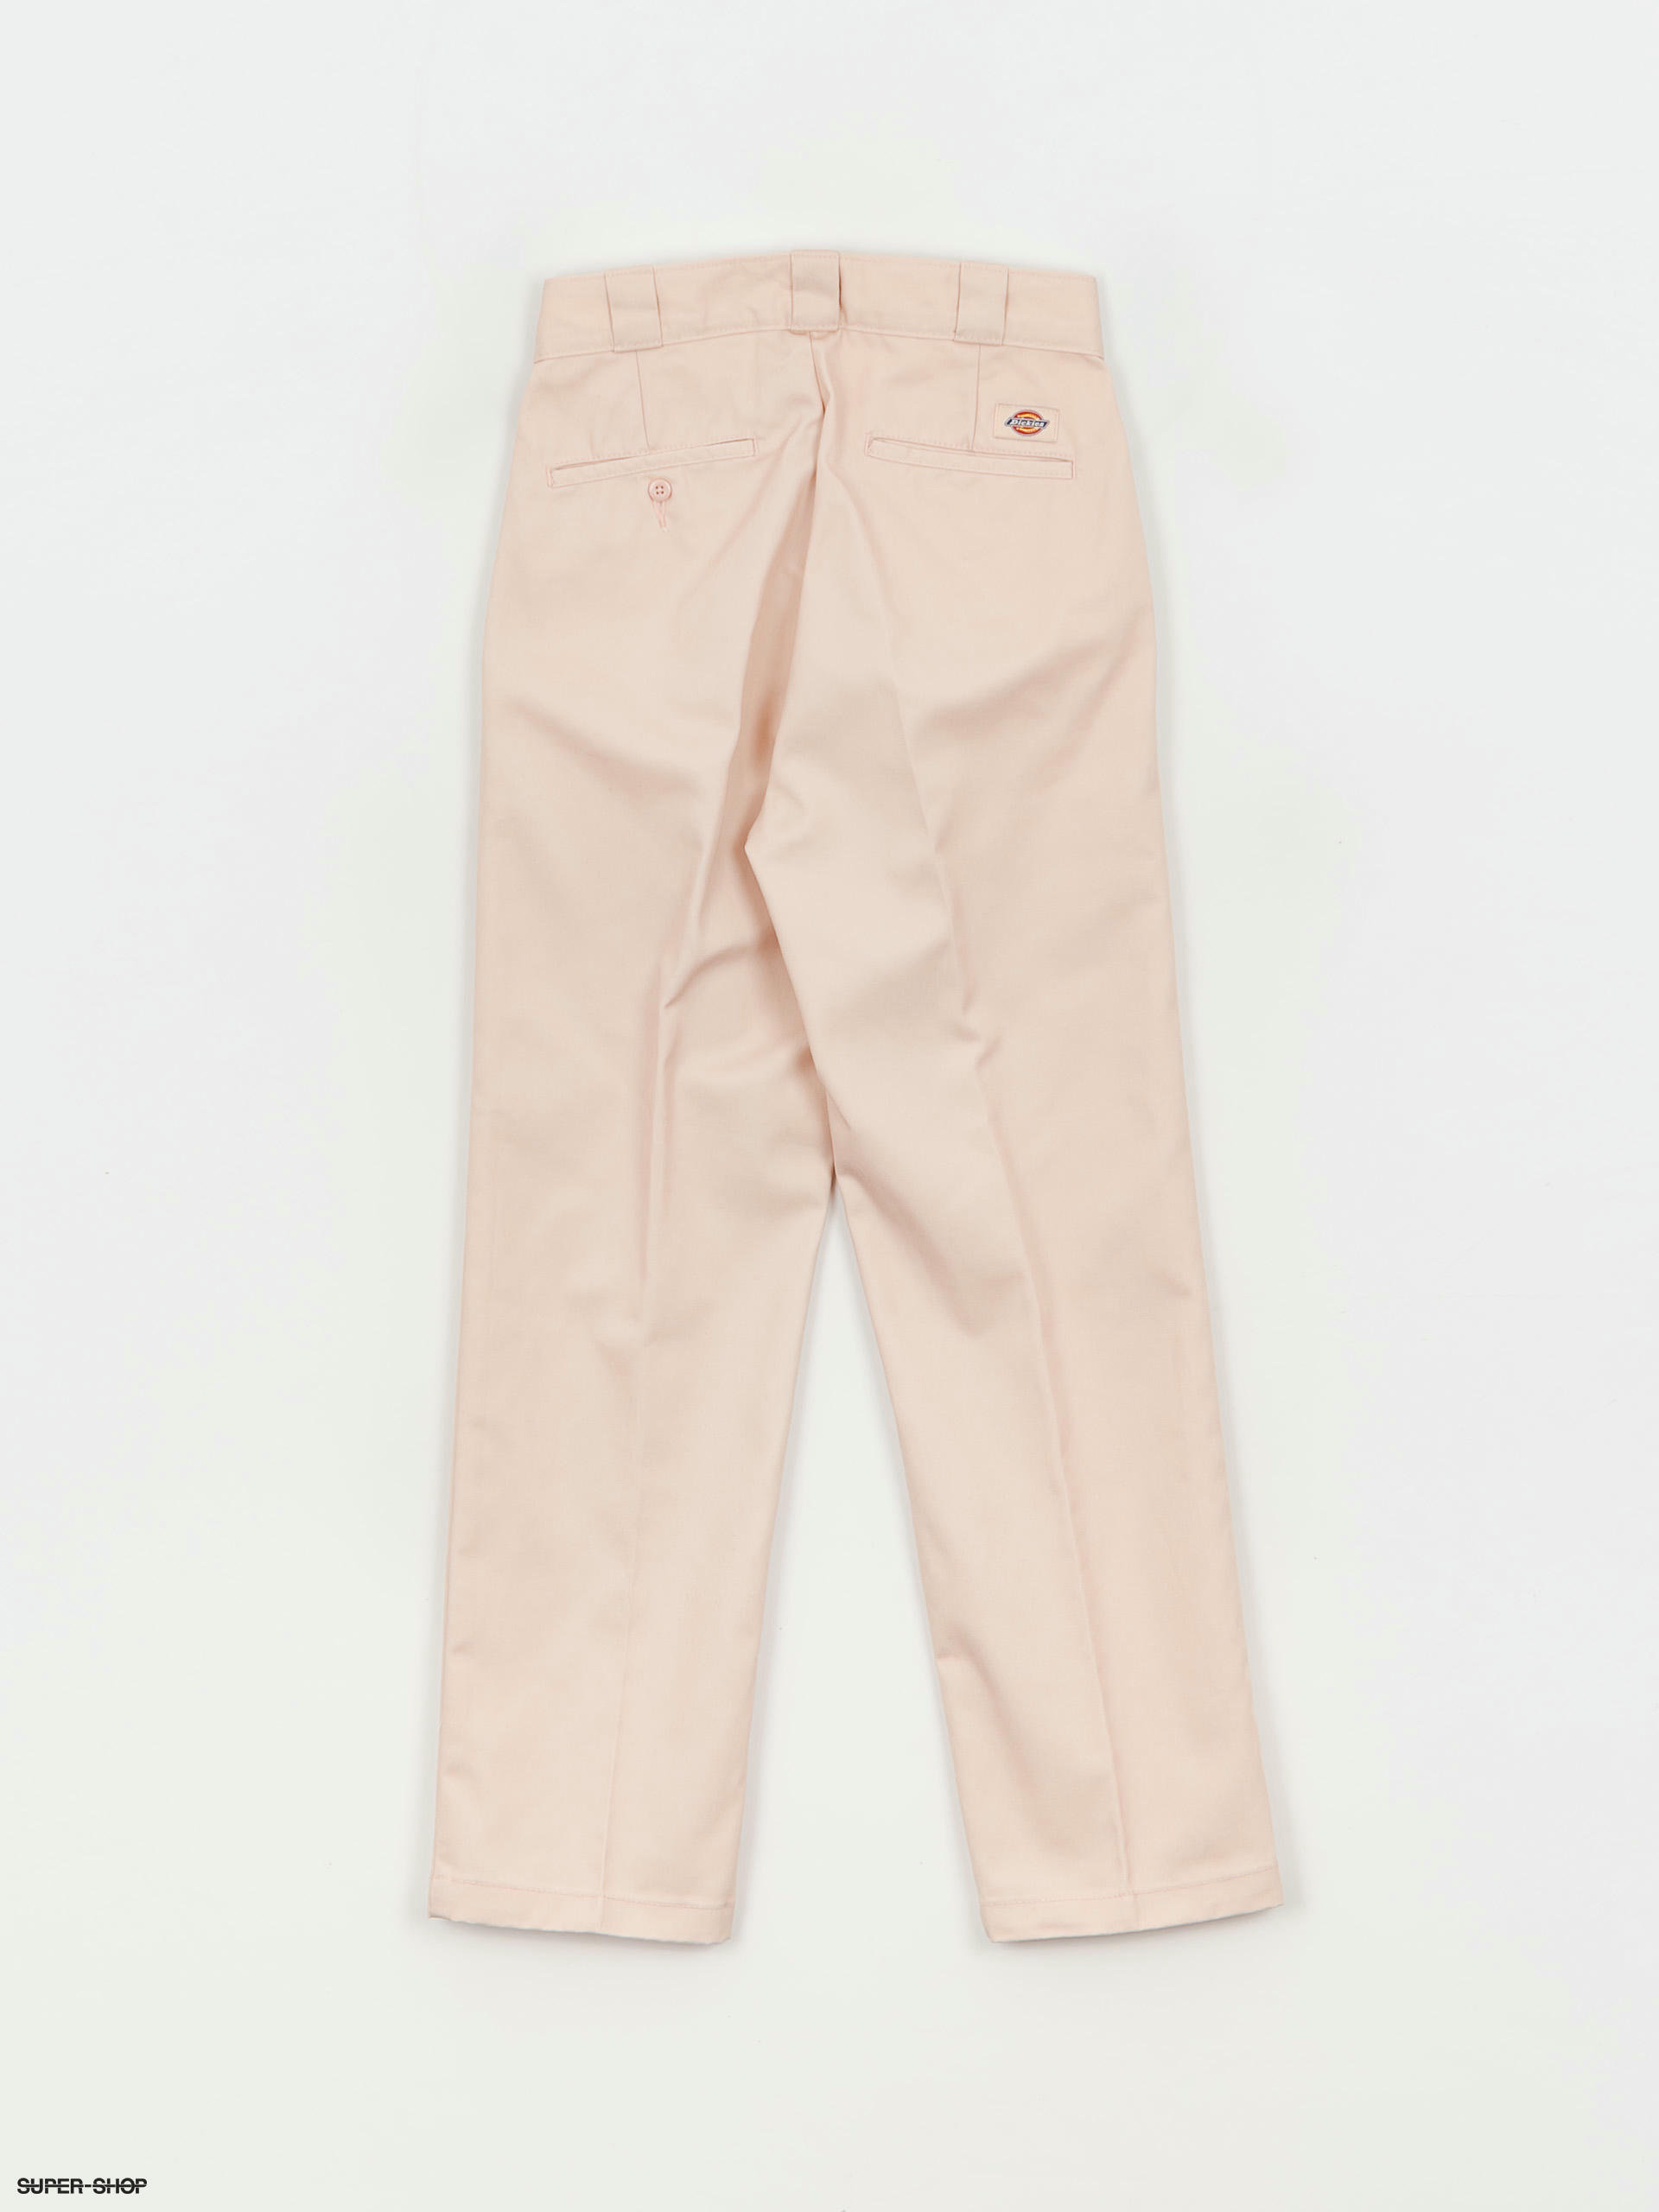 Shop Dickies Elizaville Recycled Pants women (peach whip) online